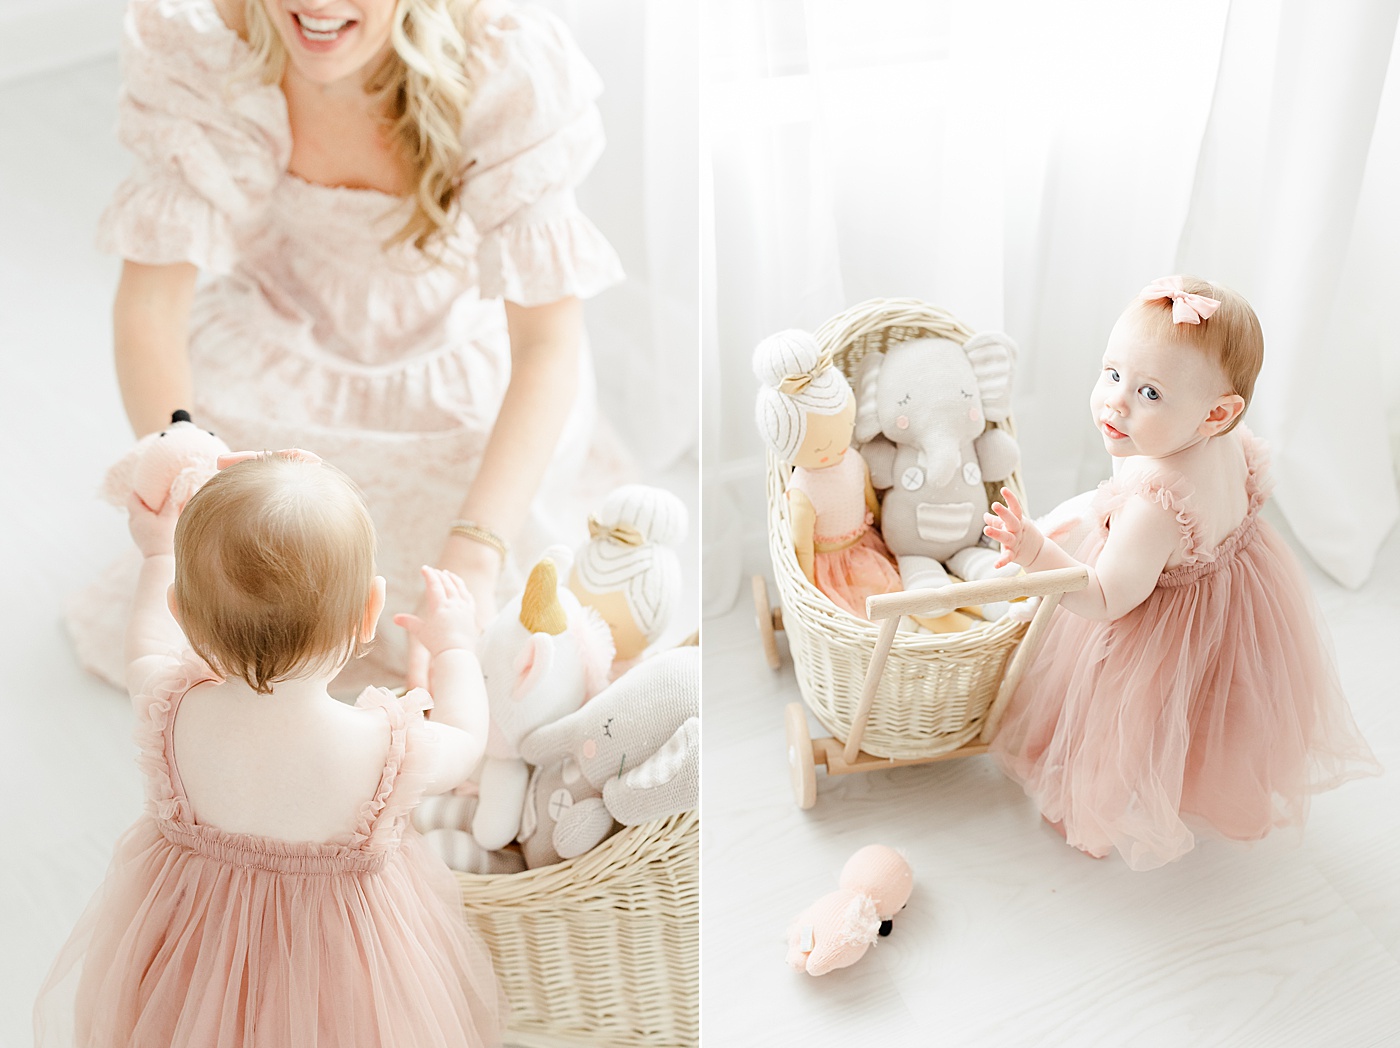 Mom with daughter at first birthday photoshoot | Kristin Wood Photography